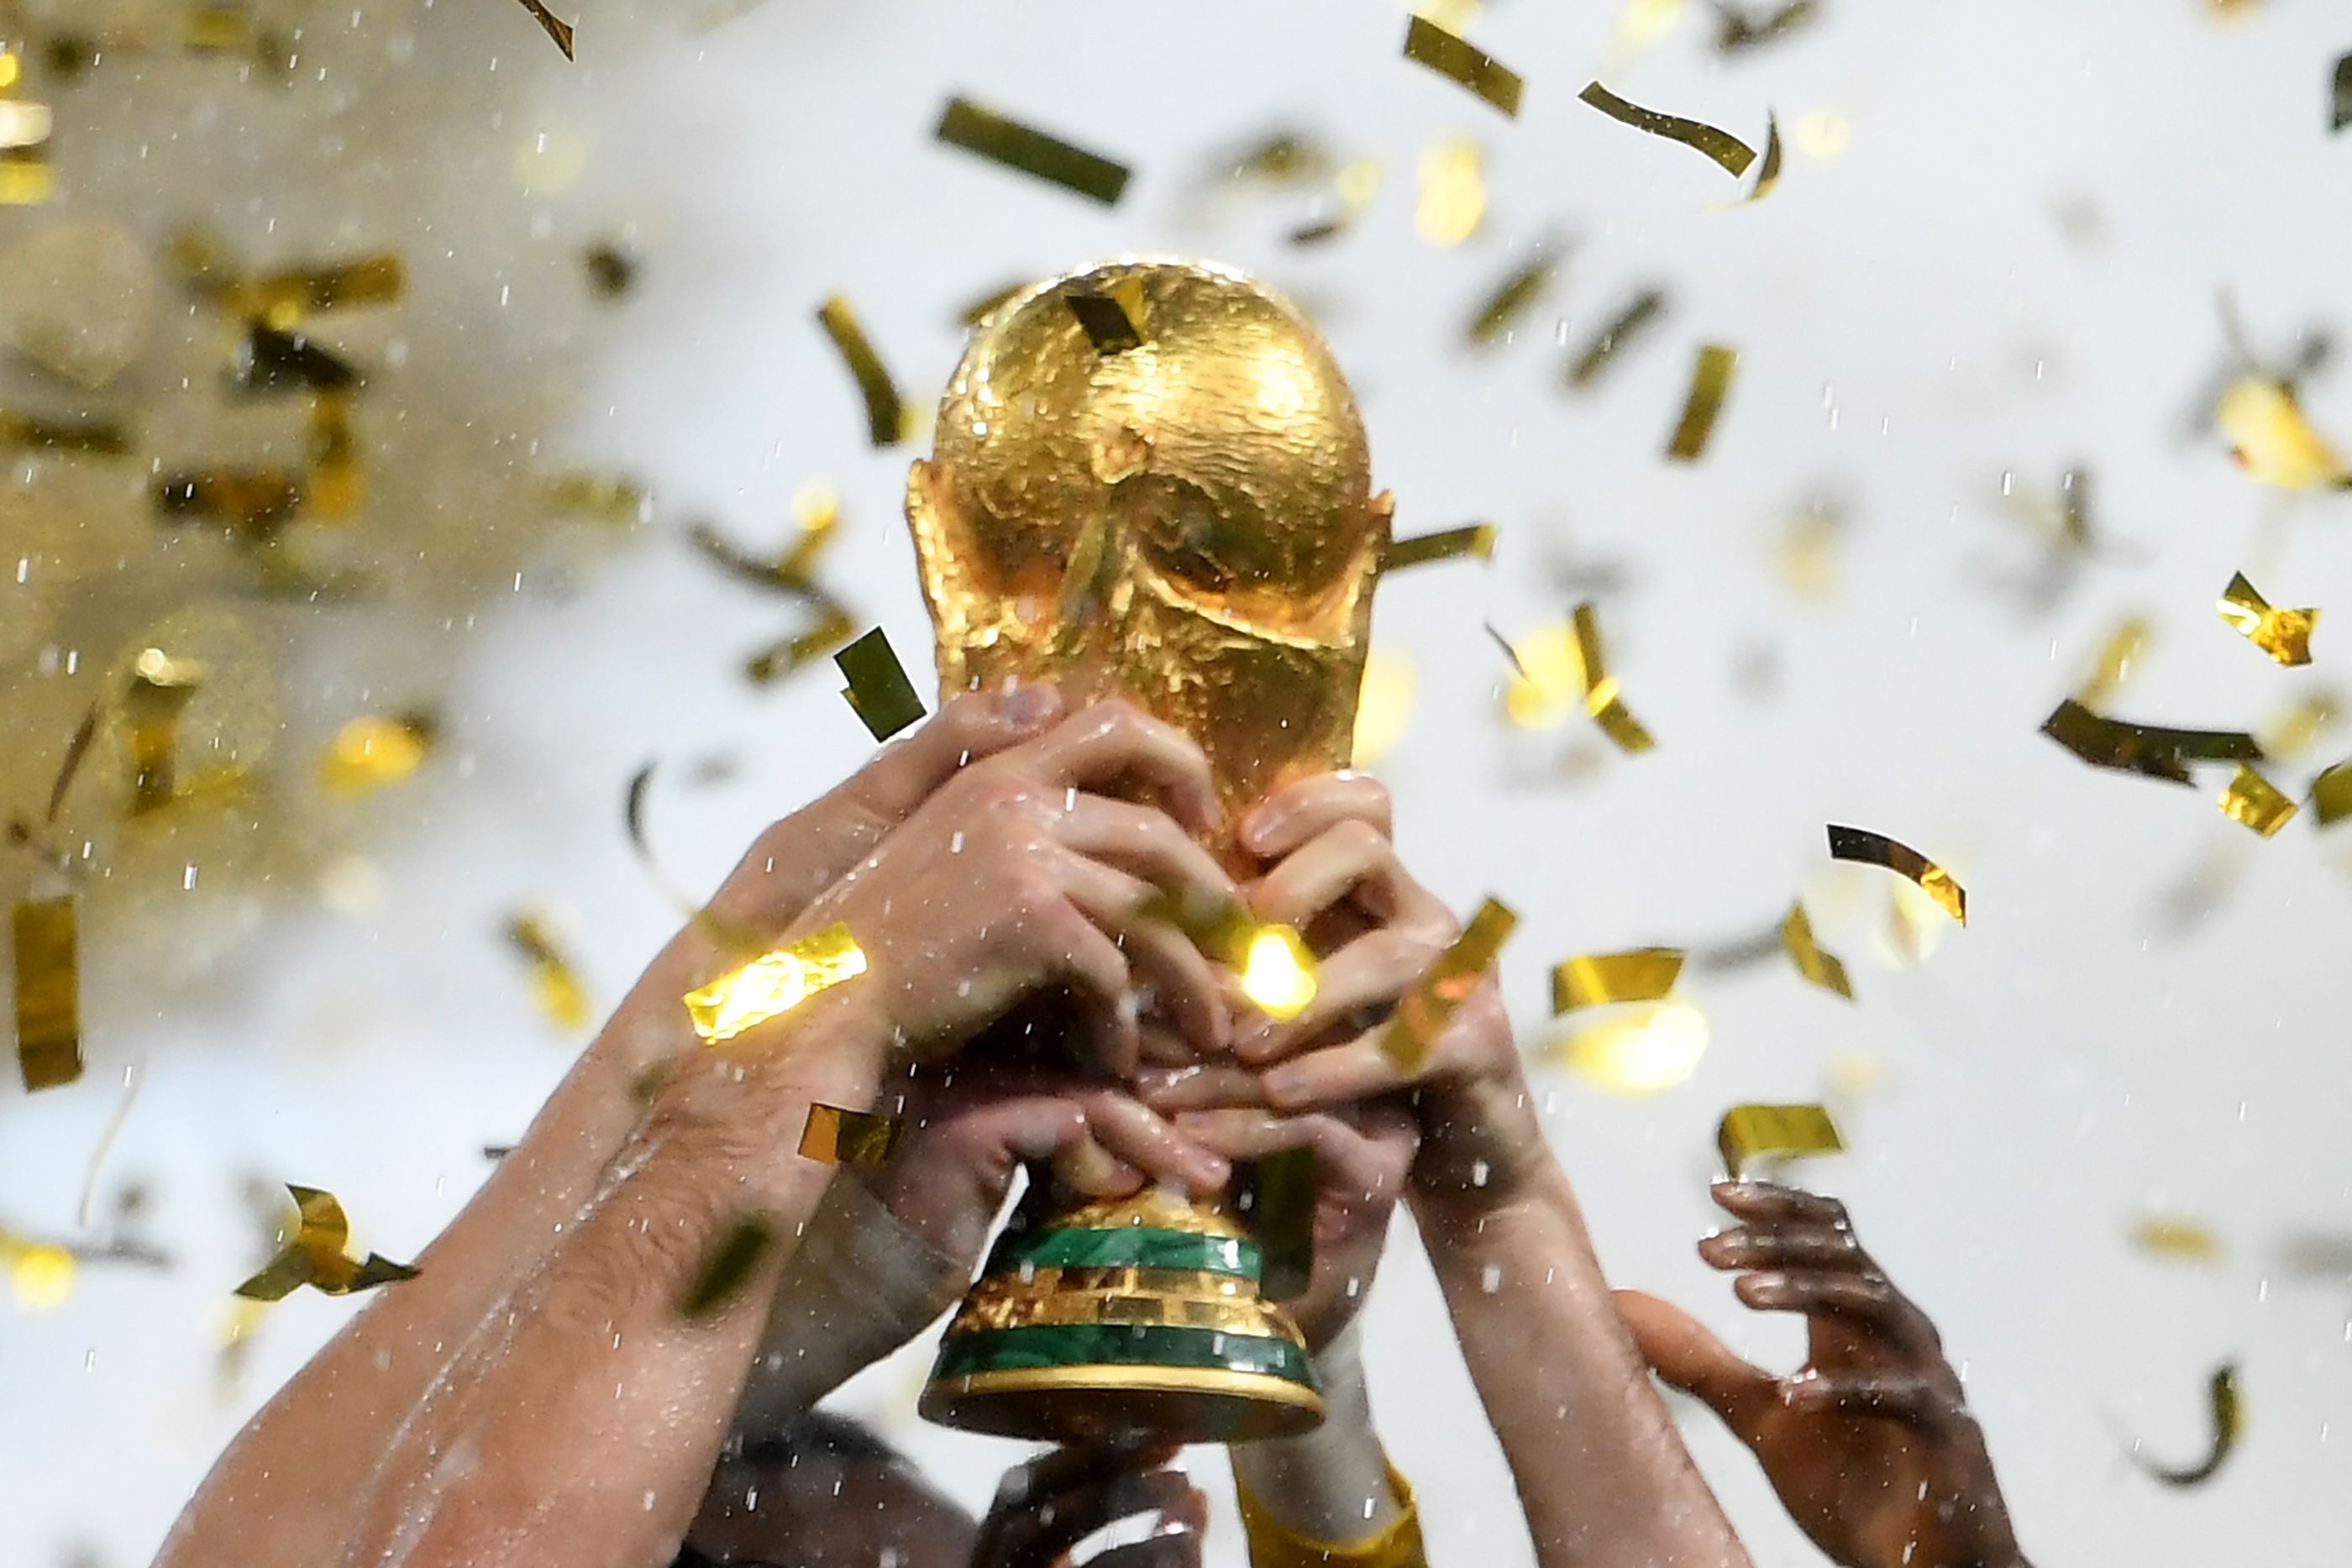 2026 World Cup Host Cities Revealed by FIFA